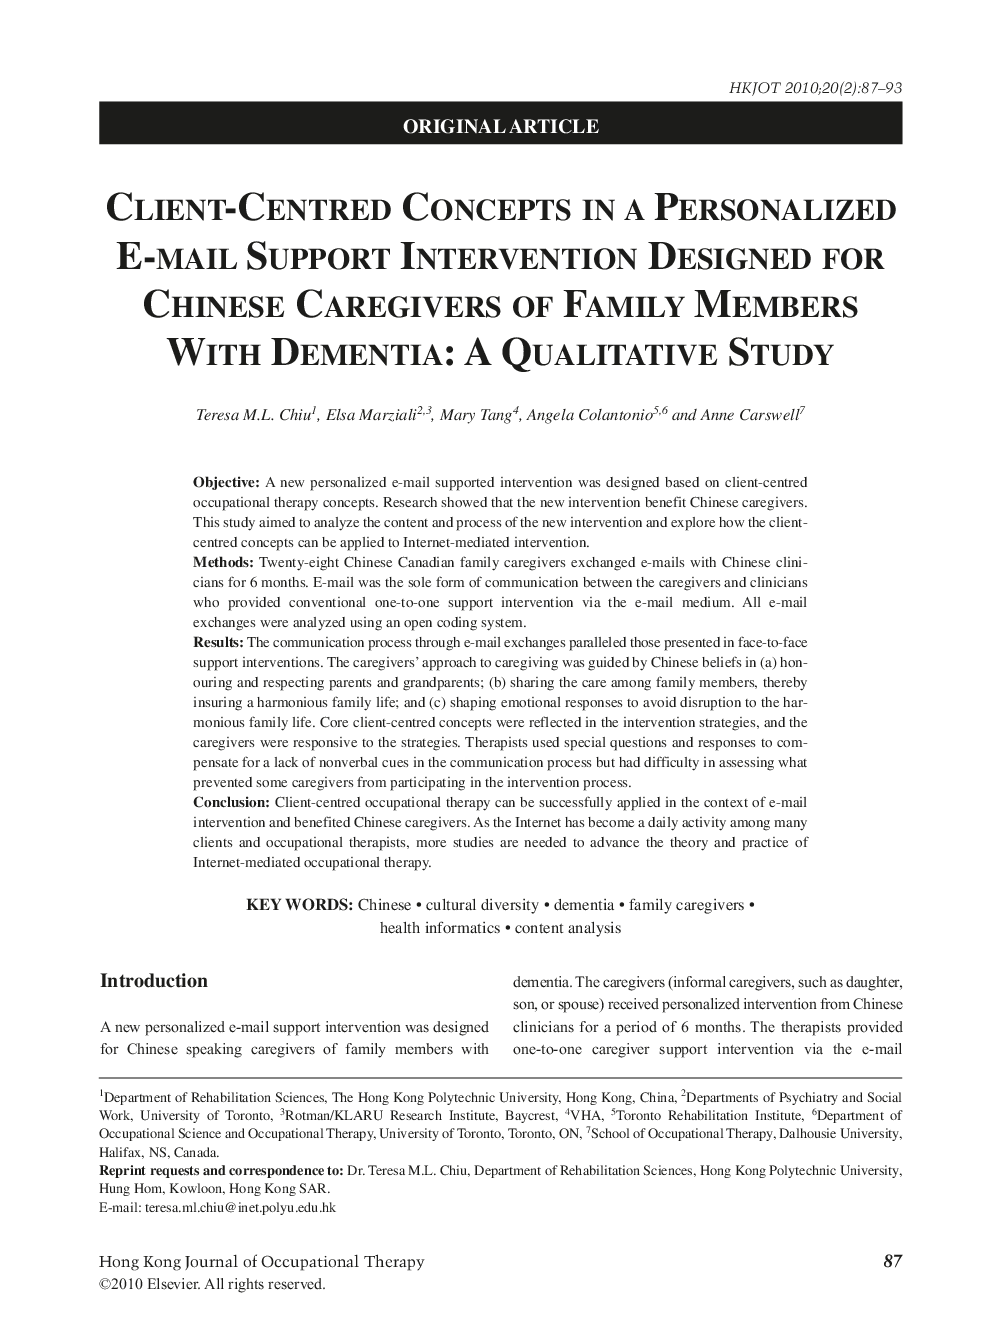 Client-Centred Concepts in a Personalized E-mail Support Intervention Designed for Chinese Caregivers of Family Members With Dementia: A Qualitative Study